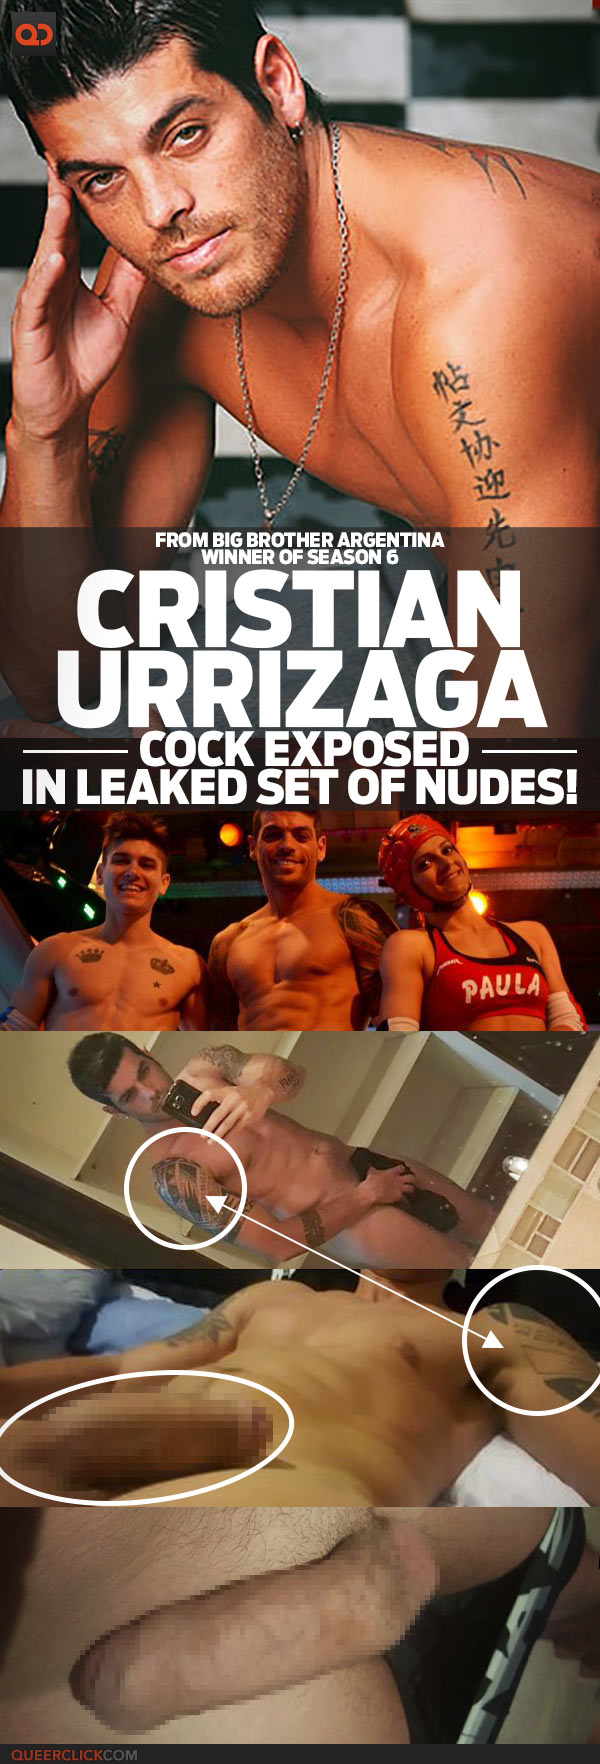 Cristian Urrizaga, From Big Brother Argentina And Winner Of Season 6, Cock Exposed In Leaked Set Of Nudes!